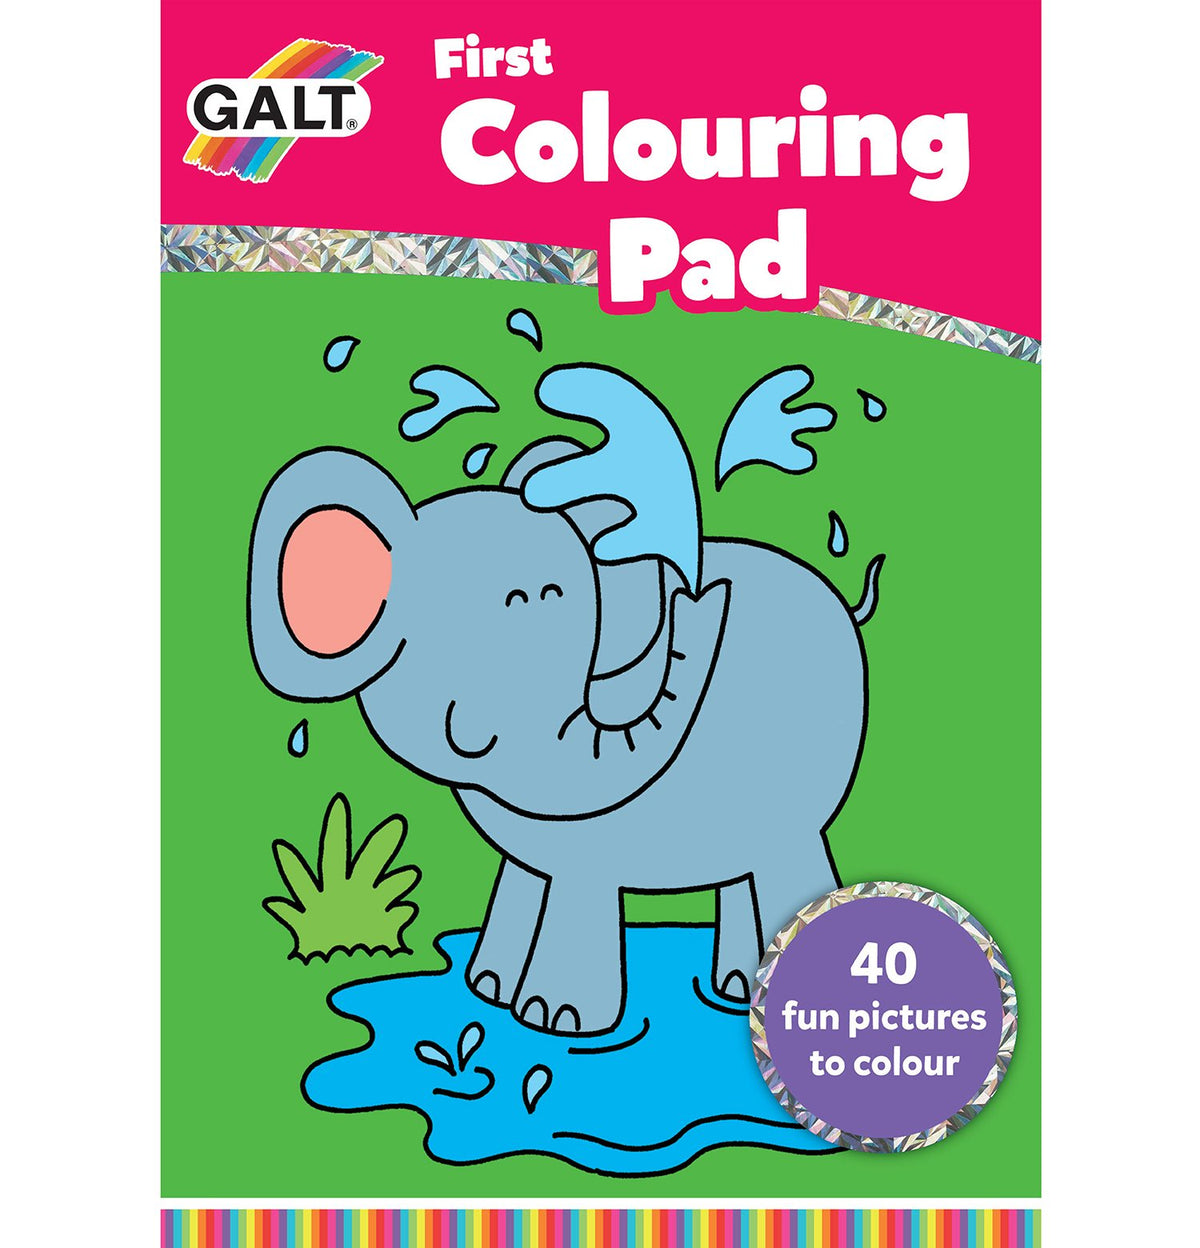 First Colouring Pad - Galt